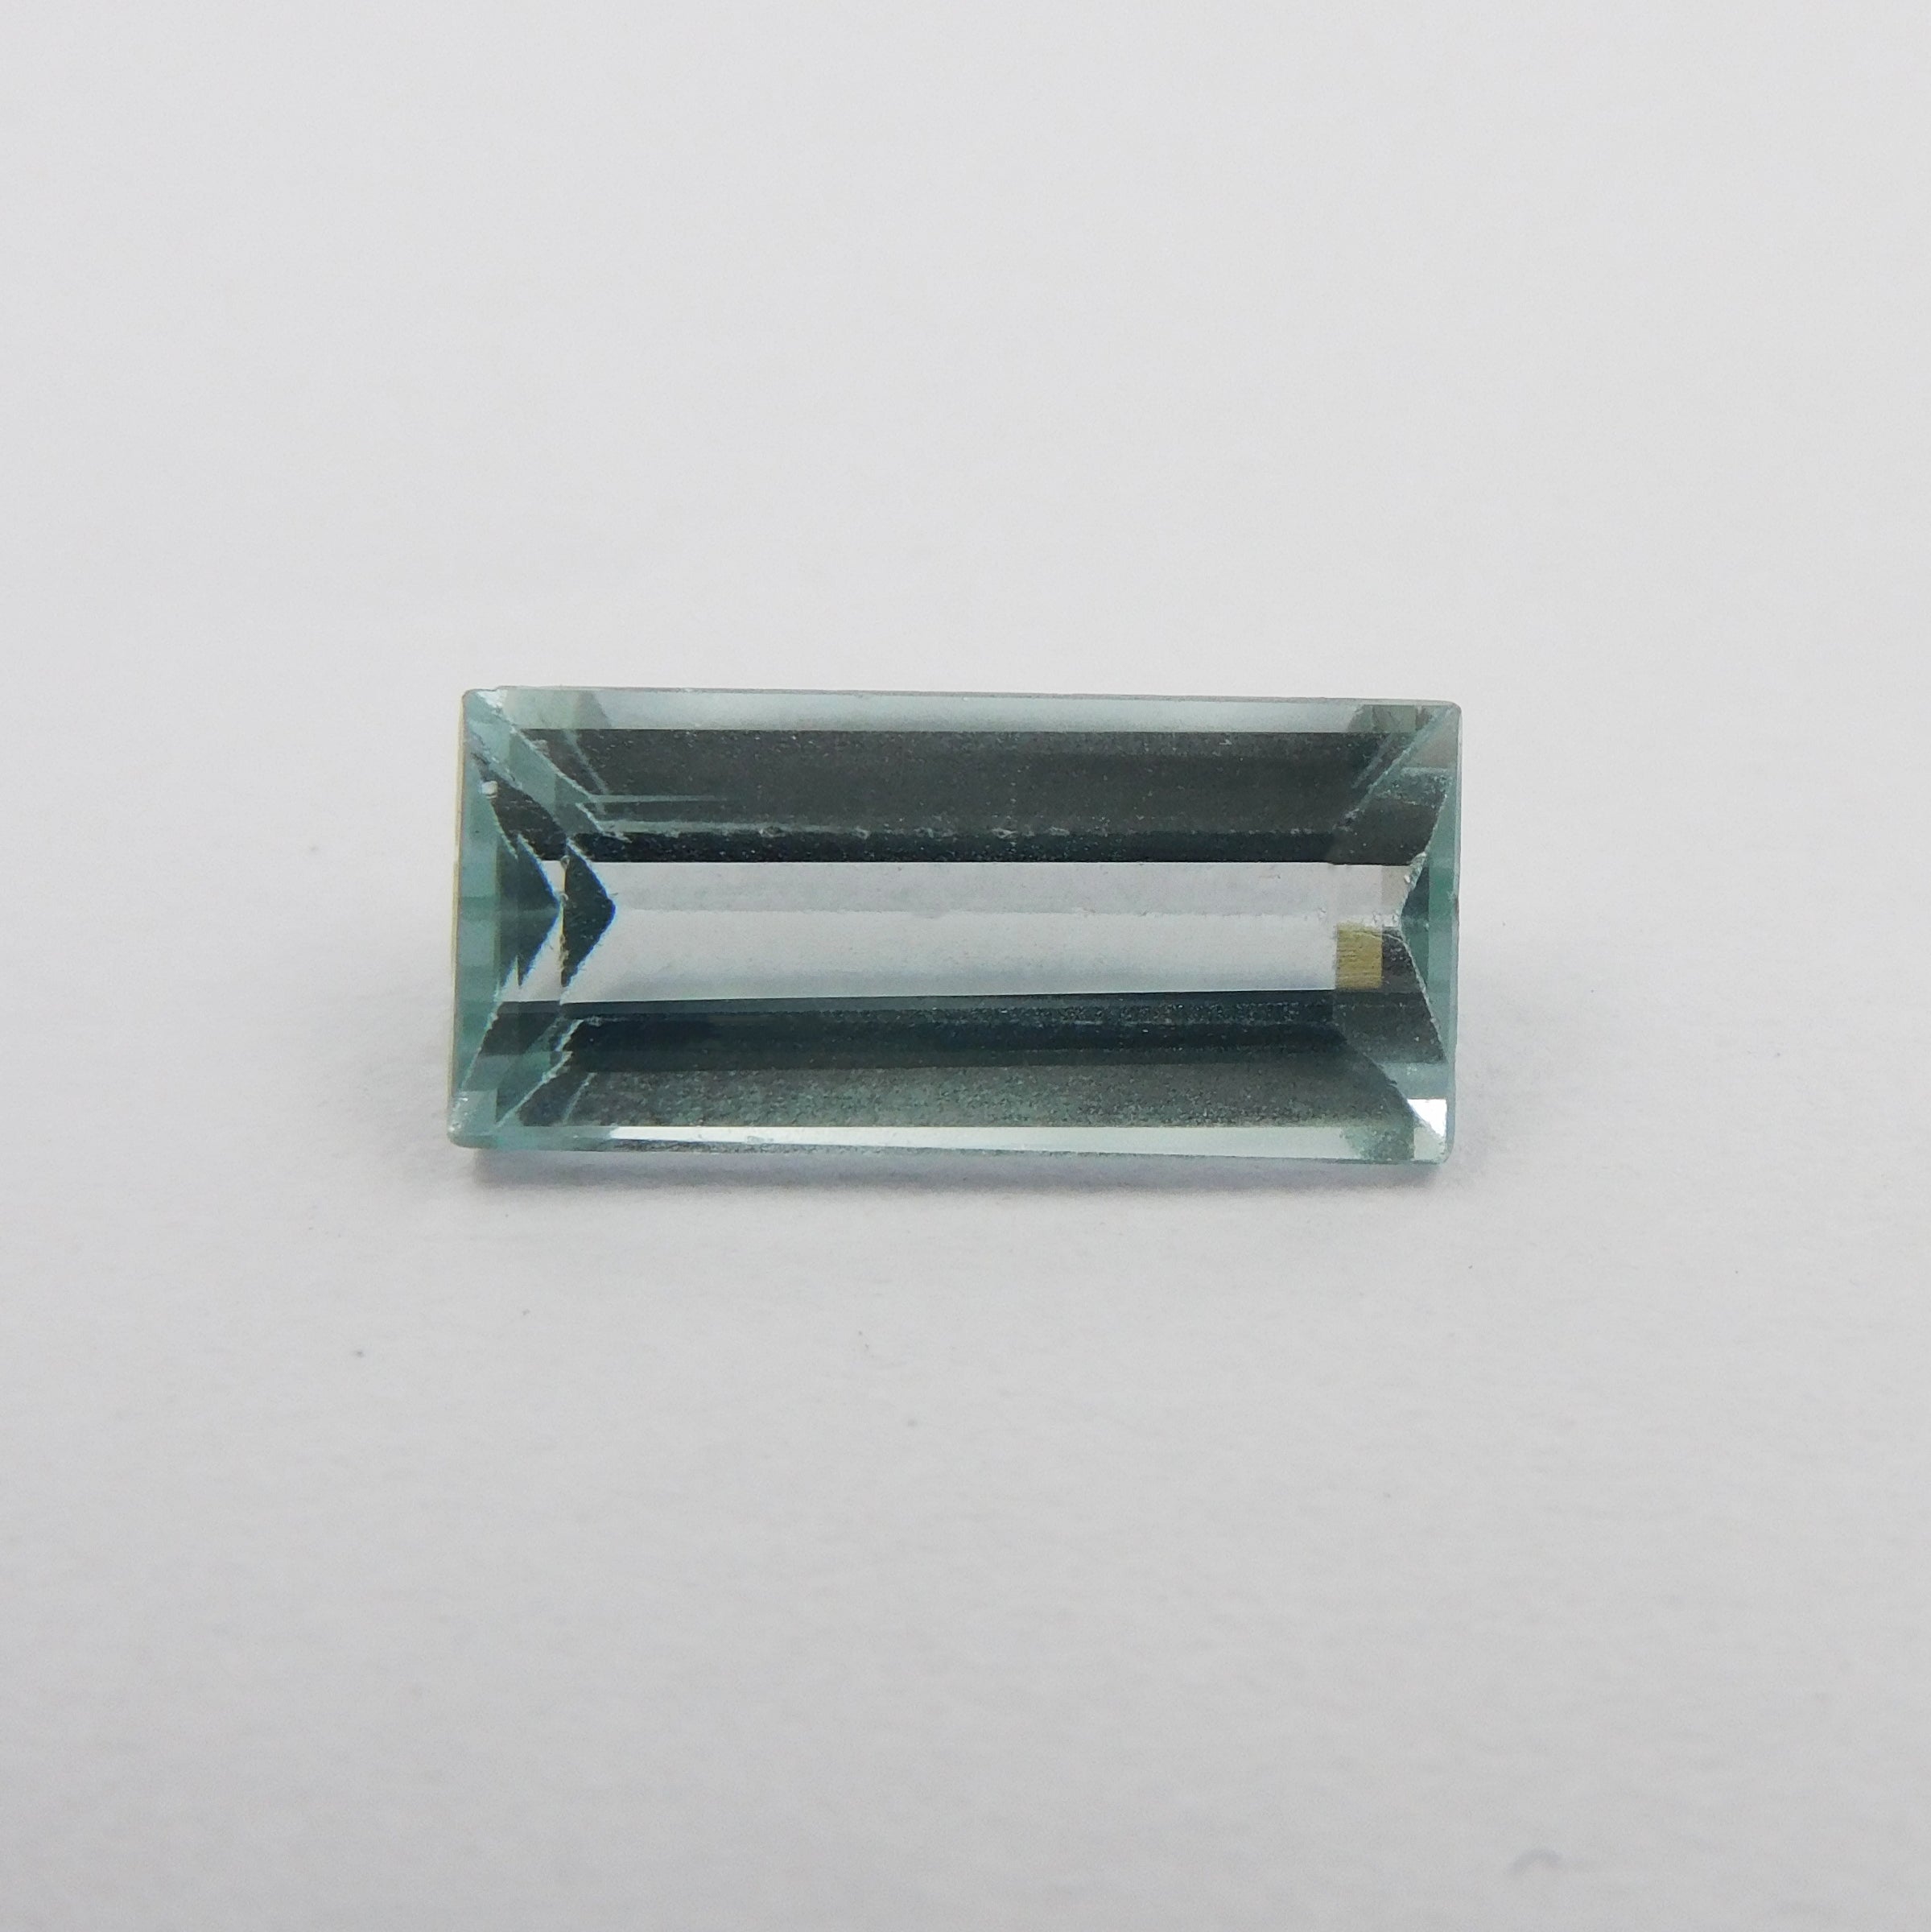 Genuine Aquamarine Jwelery Making Stone 6.88 Carat Natural Certified Baguette Shape Loose Gemstone Ocean Blue Color | Free Shipping & Gift | Go With Flaw